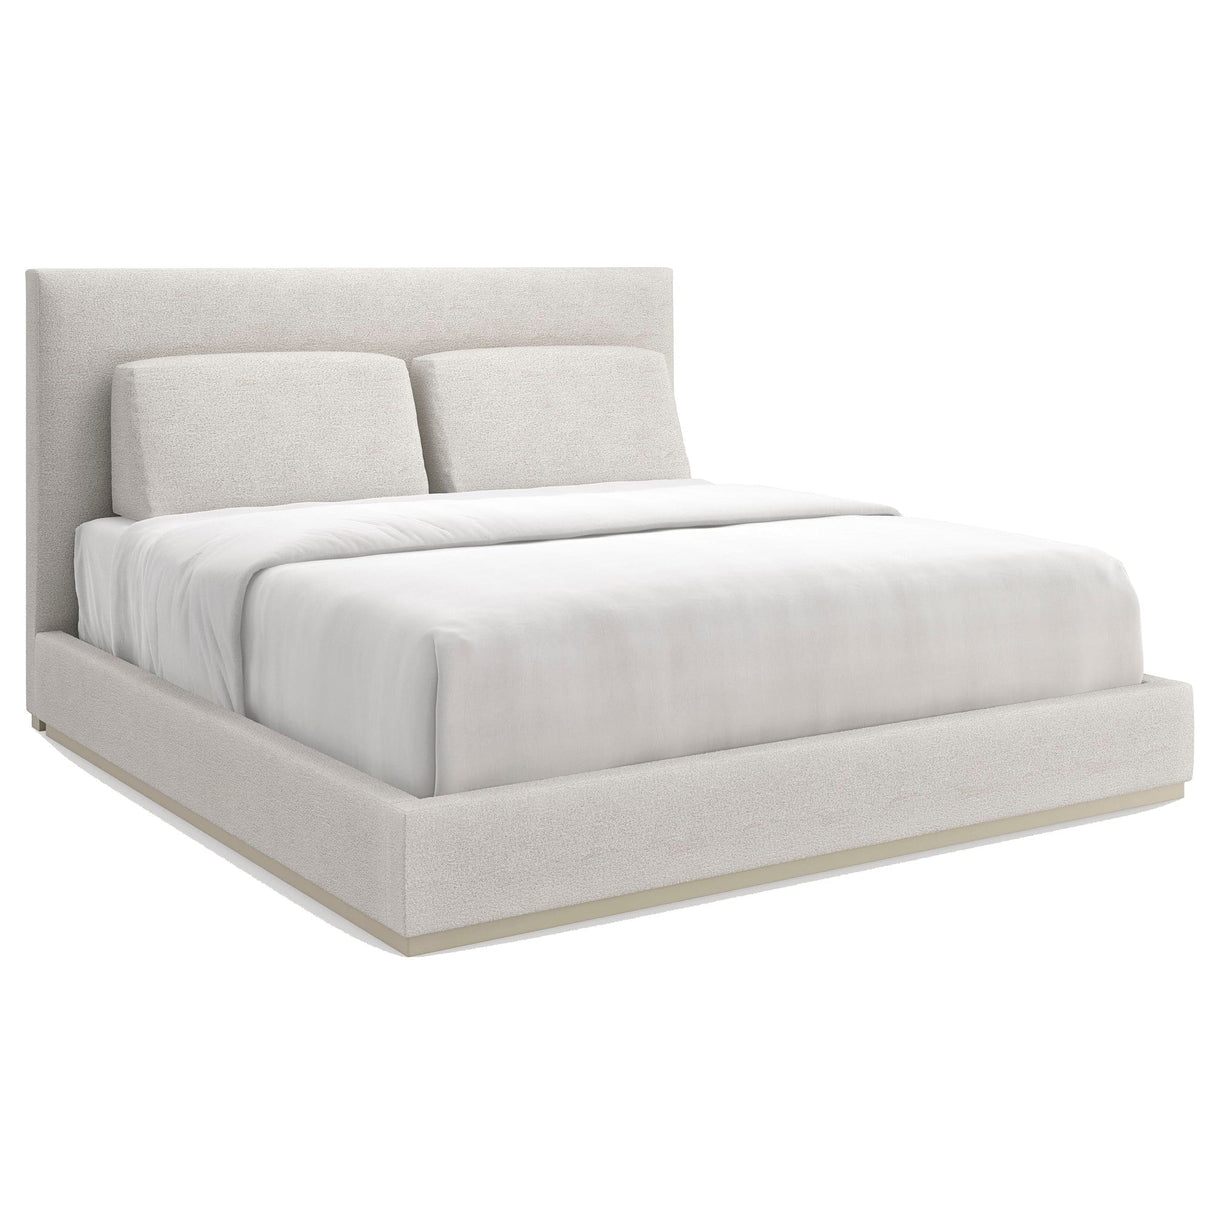 Caracole Boutique Bed Beds & Bed Frames caracole-CLA-5423-124-B-CLA-5423-124P-B 662896043822-662896043761